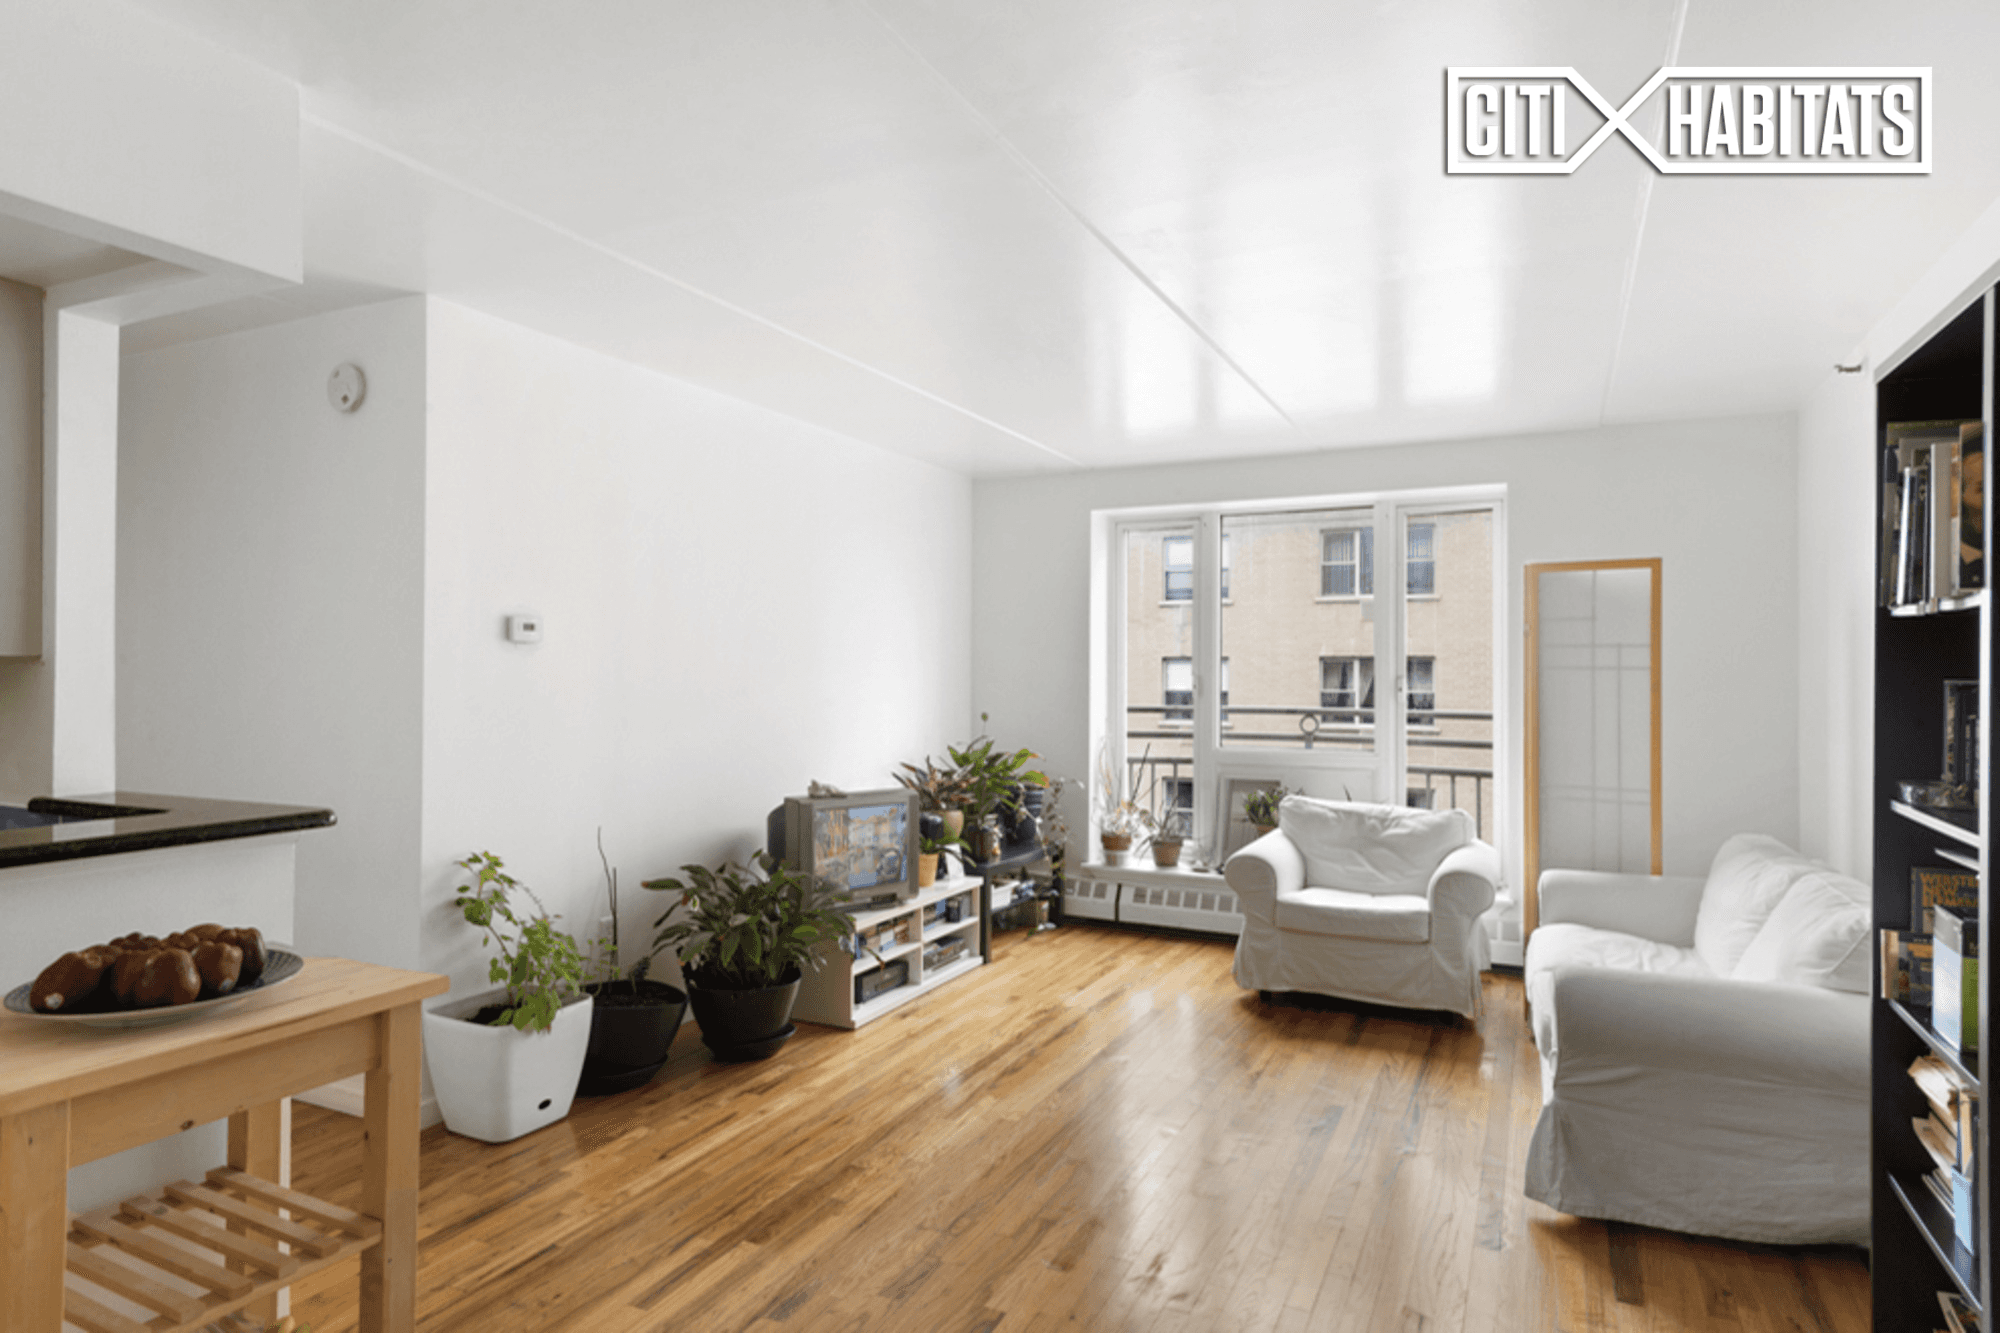 Amazing opportunity to own this two bedrooms two bathrooms in the heart of Harlem.